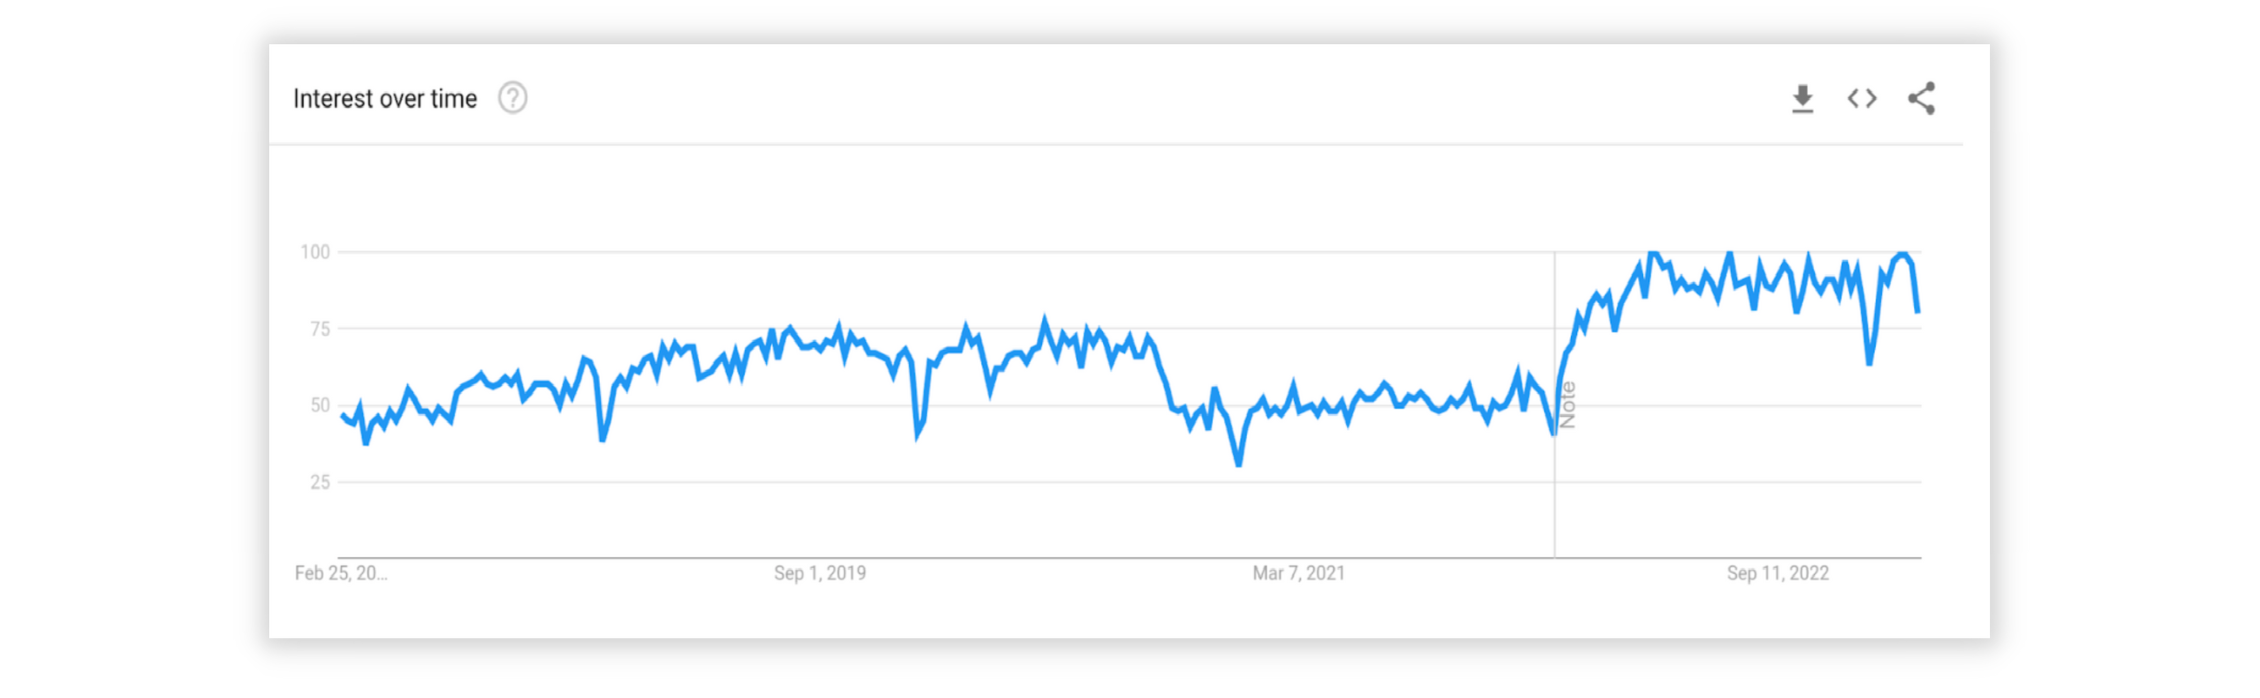 Google Trends chart for the product development trend "severless architecture"